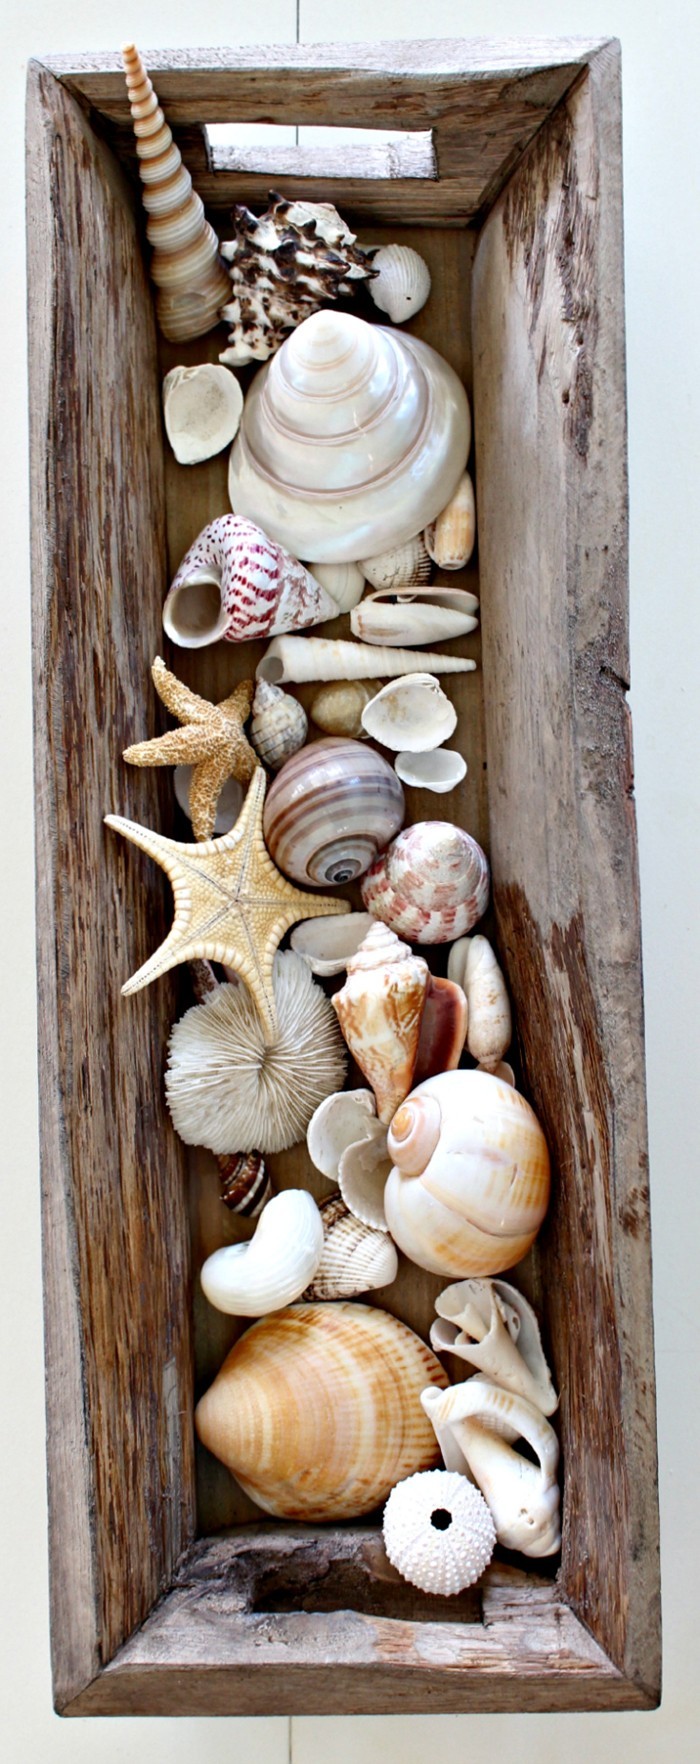 tinker with shells summer holiday tinker with natural materials diy ideas deco ideas